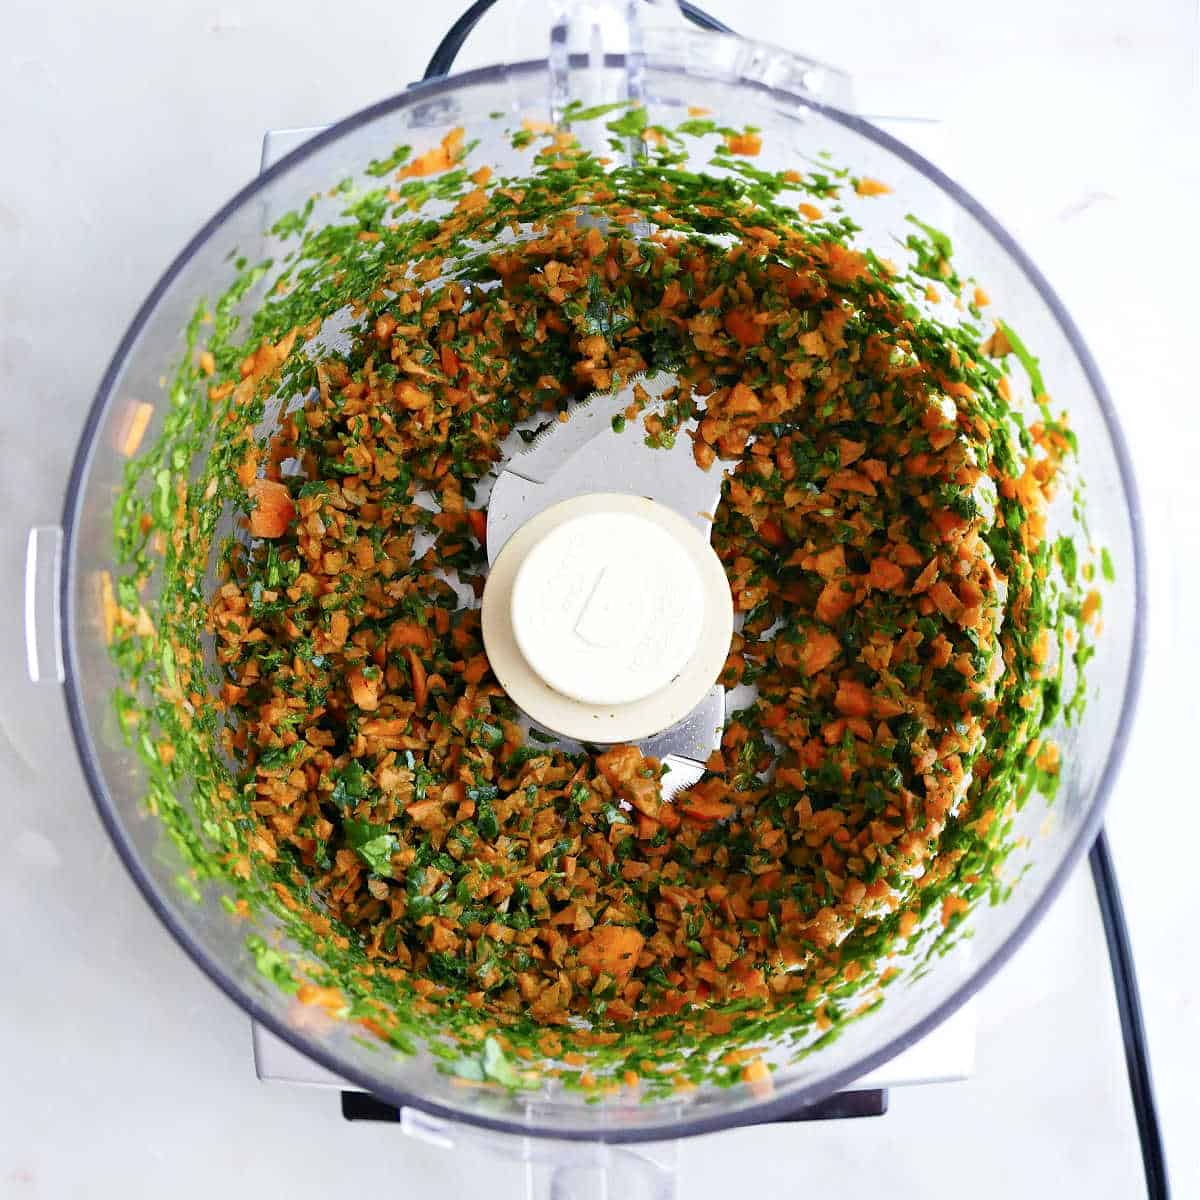 Spinach and carrots blended in a food processor.